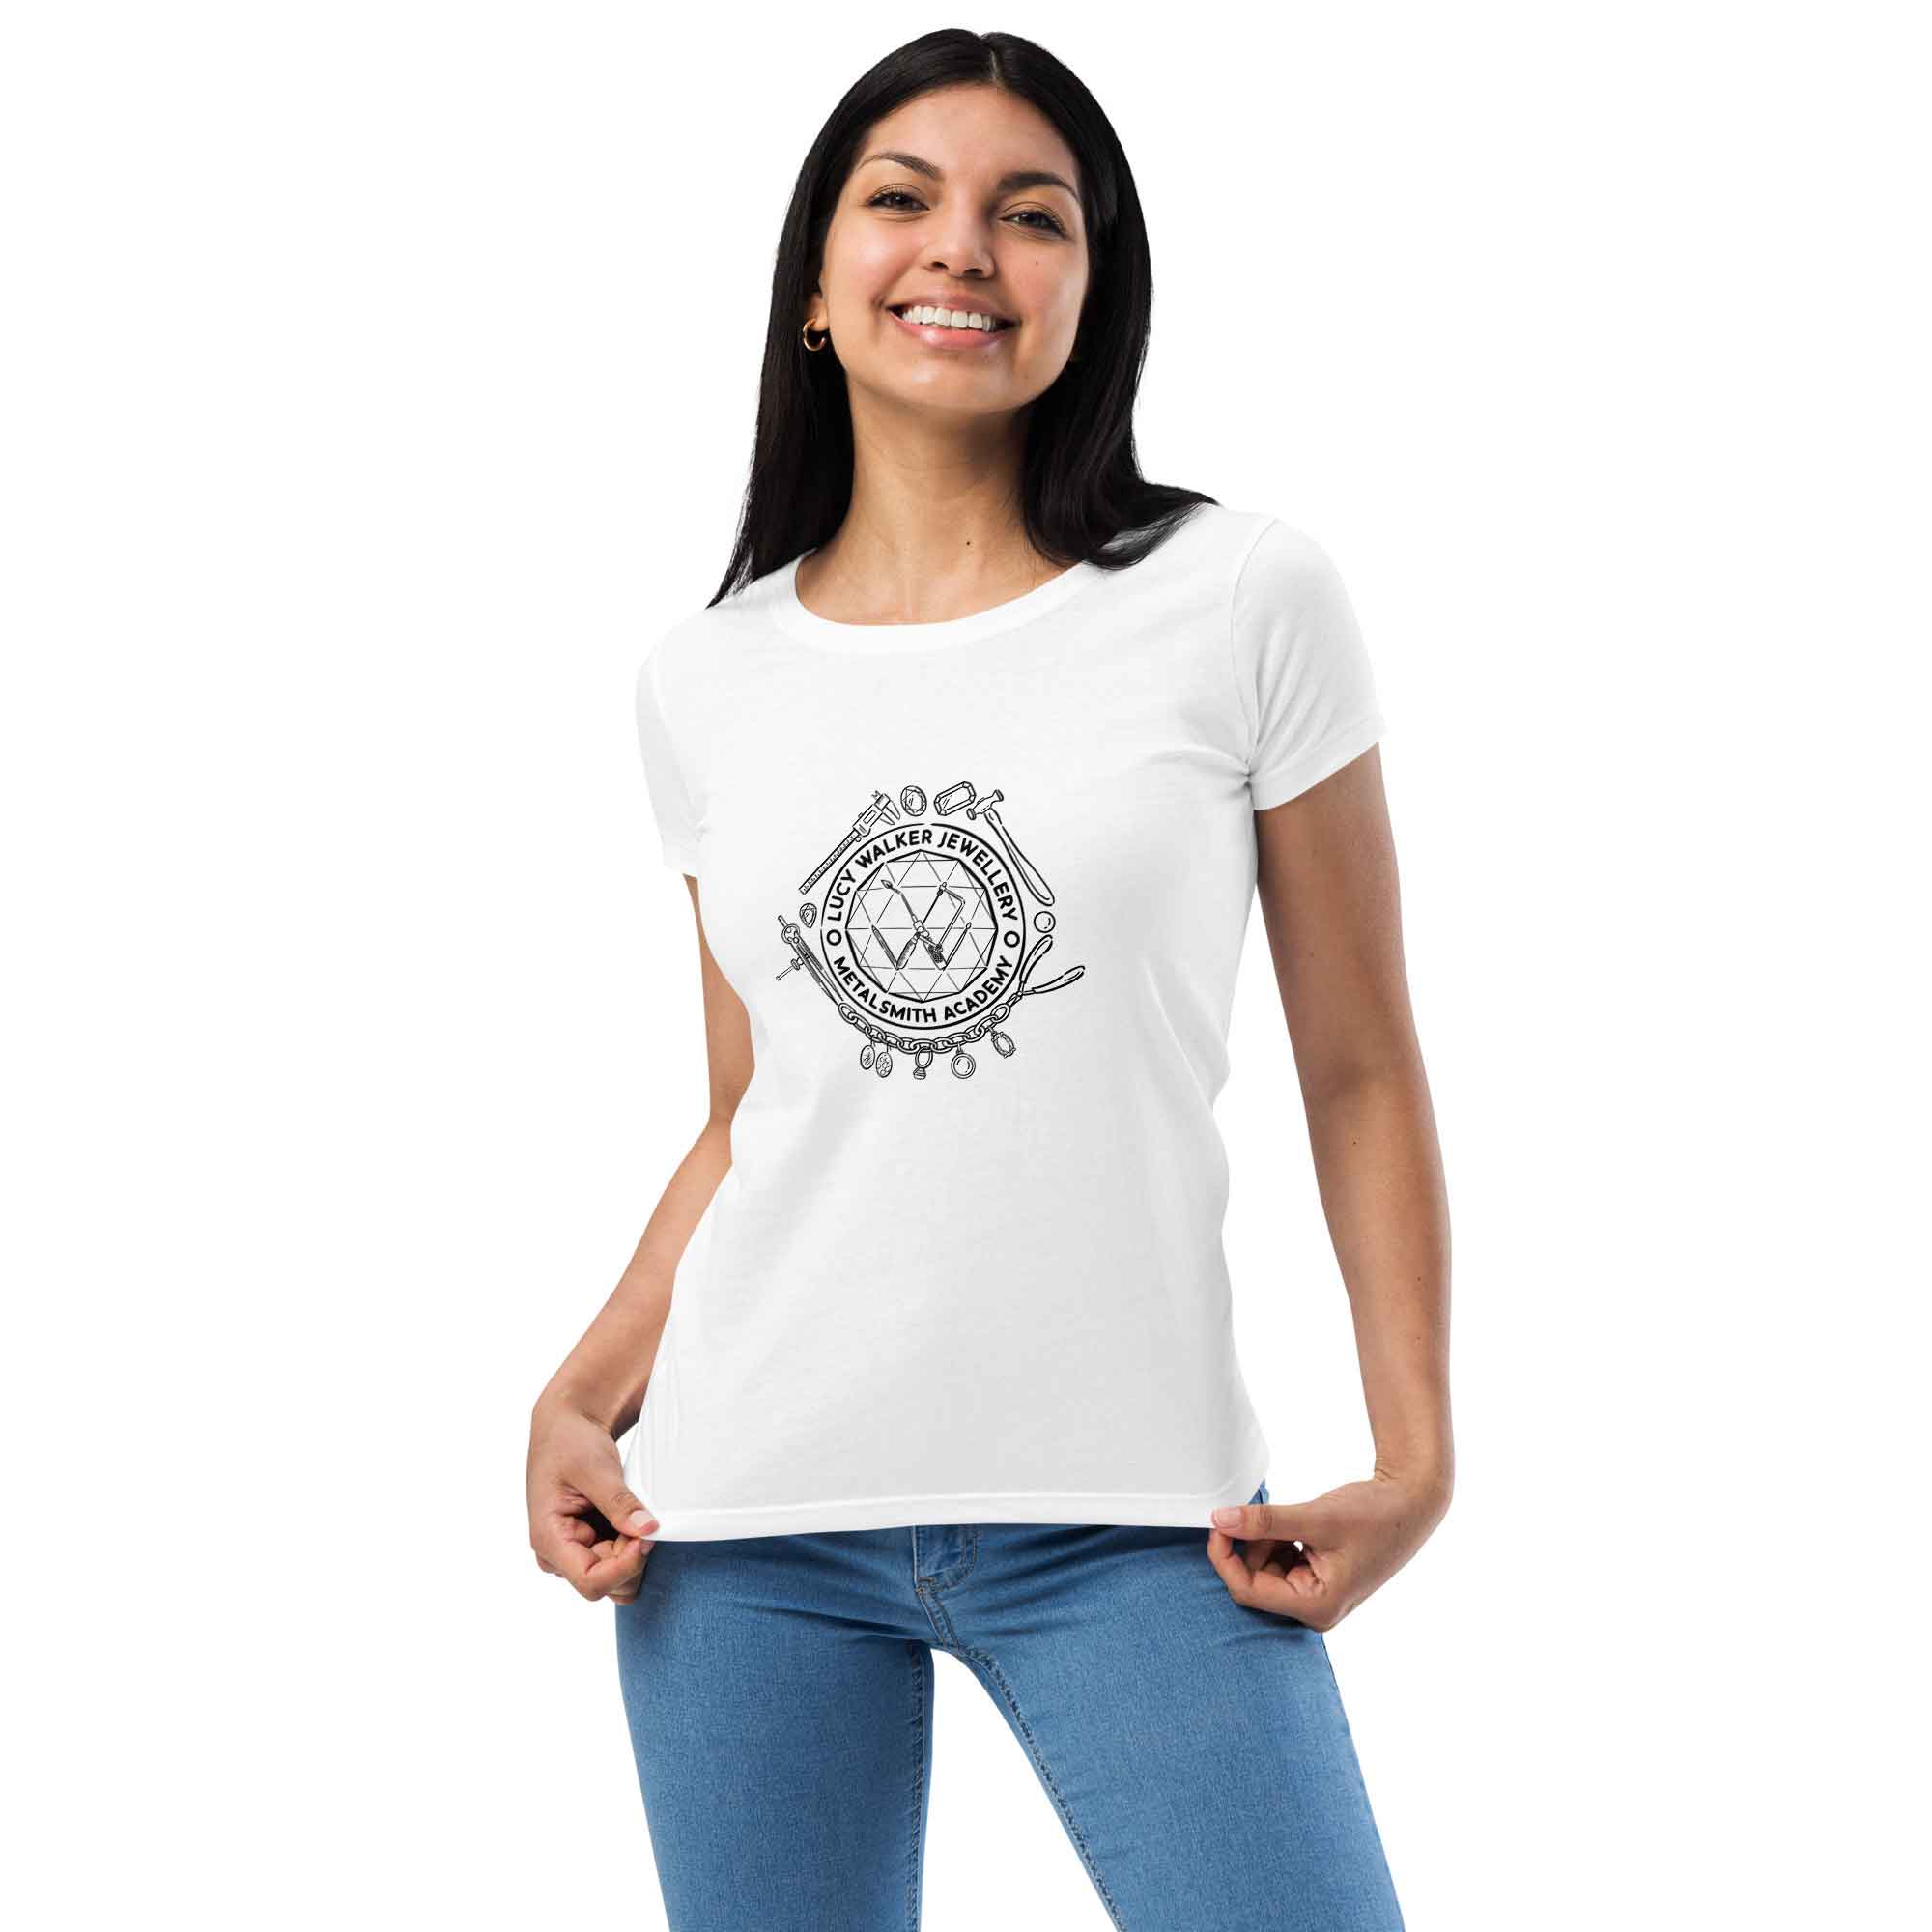 Womens Fitted T-Shirt White Front (Metalsmith Academy-Black Printing)